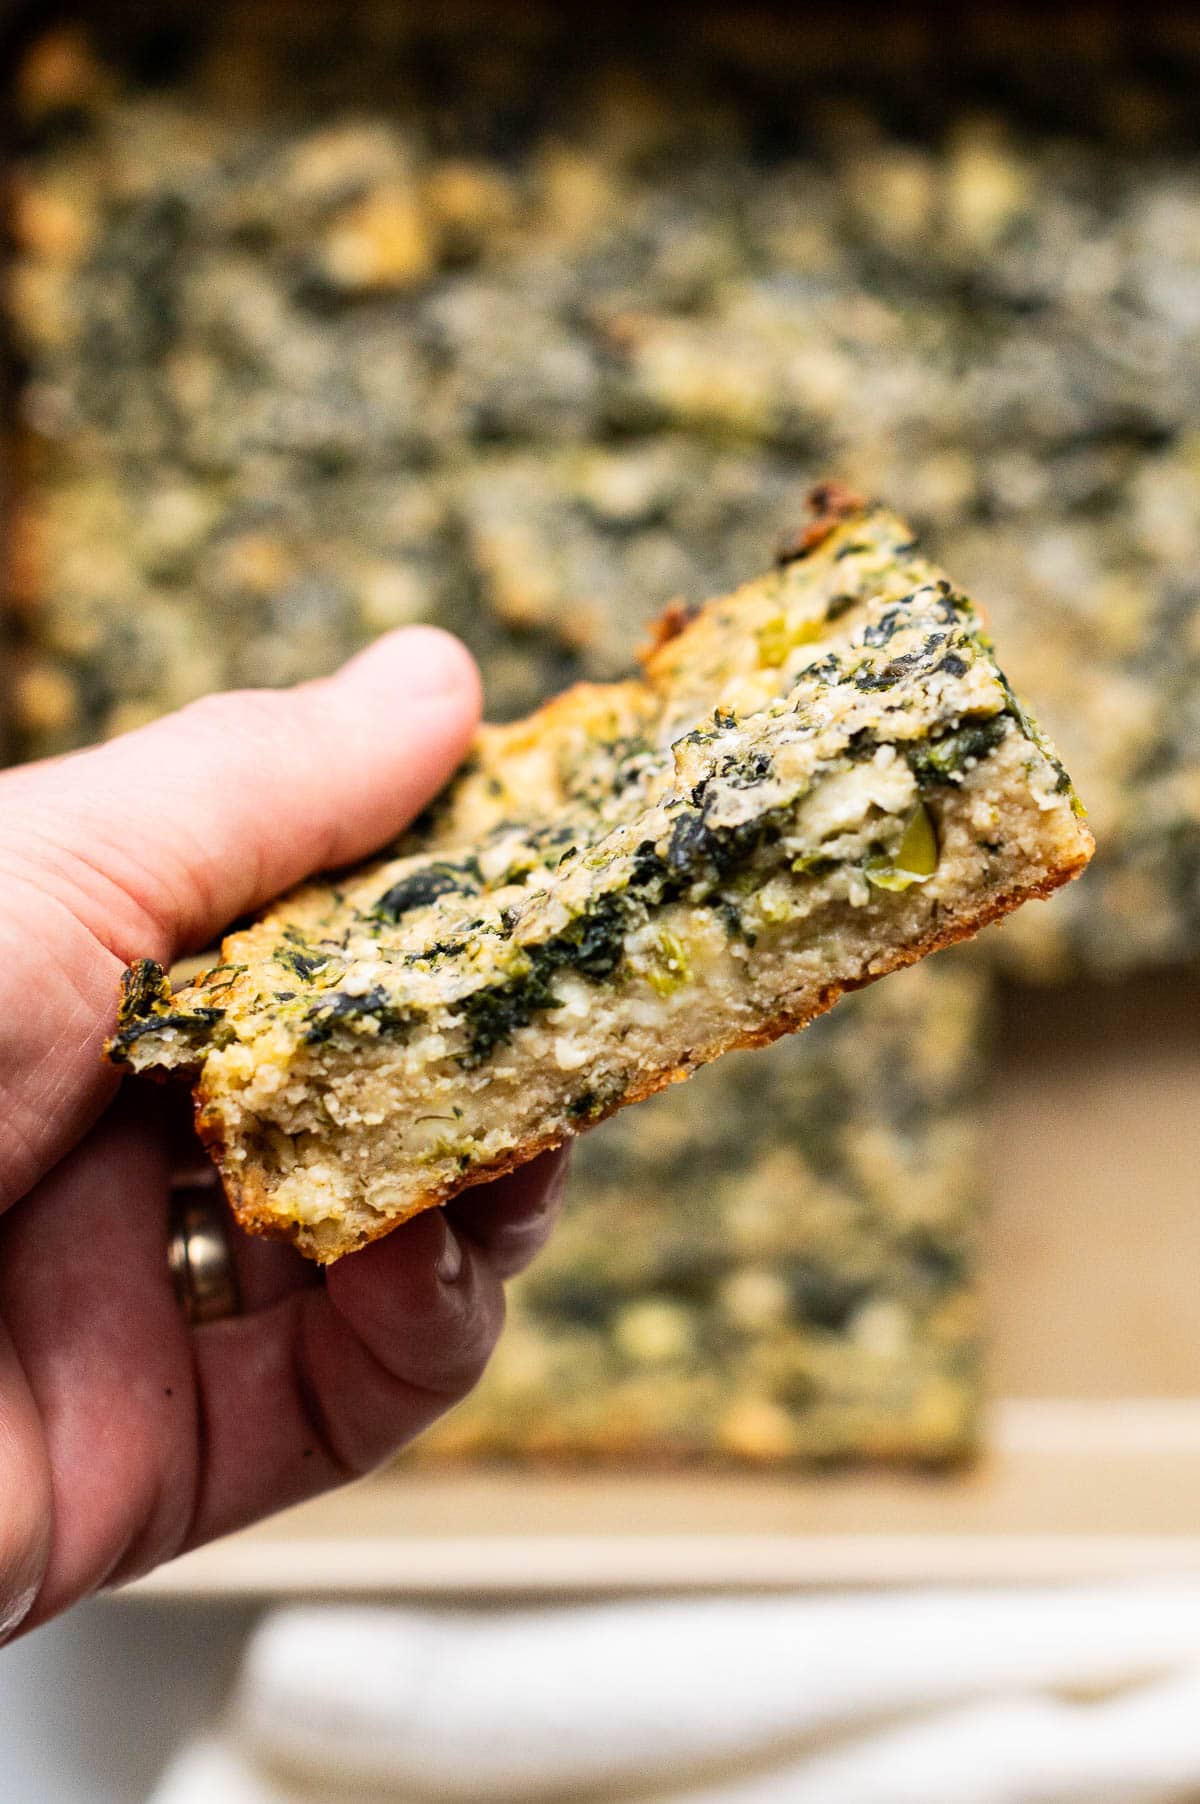 Person holding a spinach brownie showing texture inside.